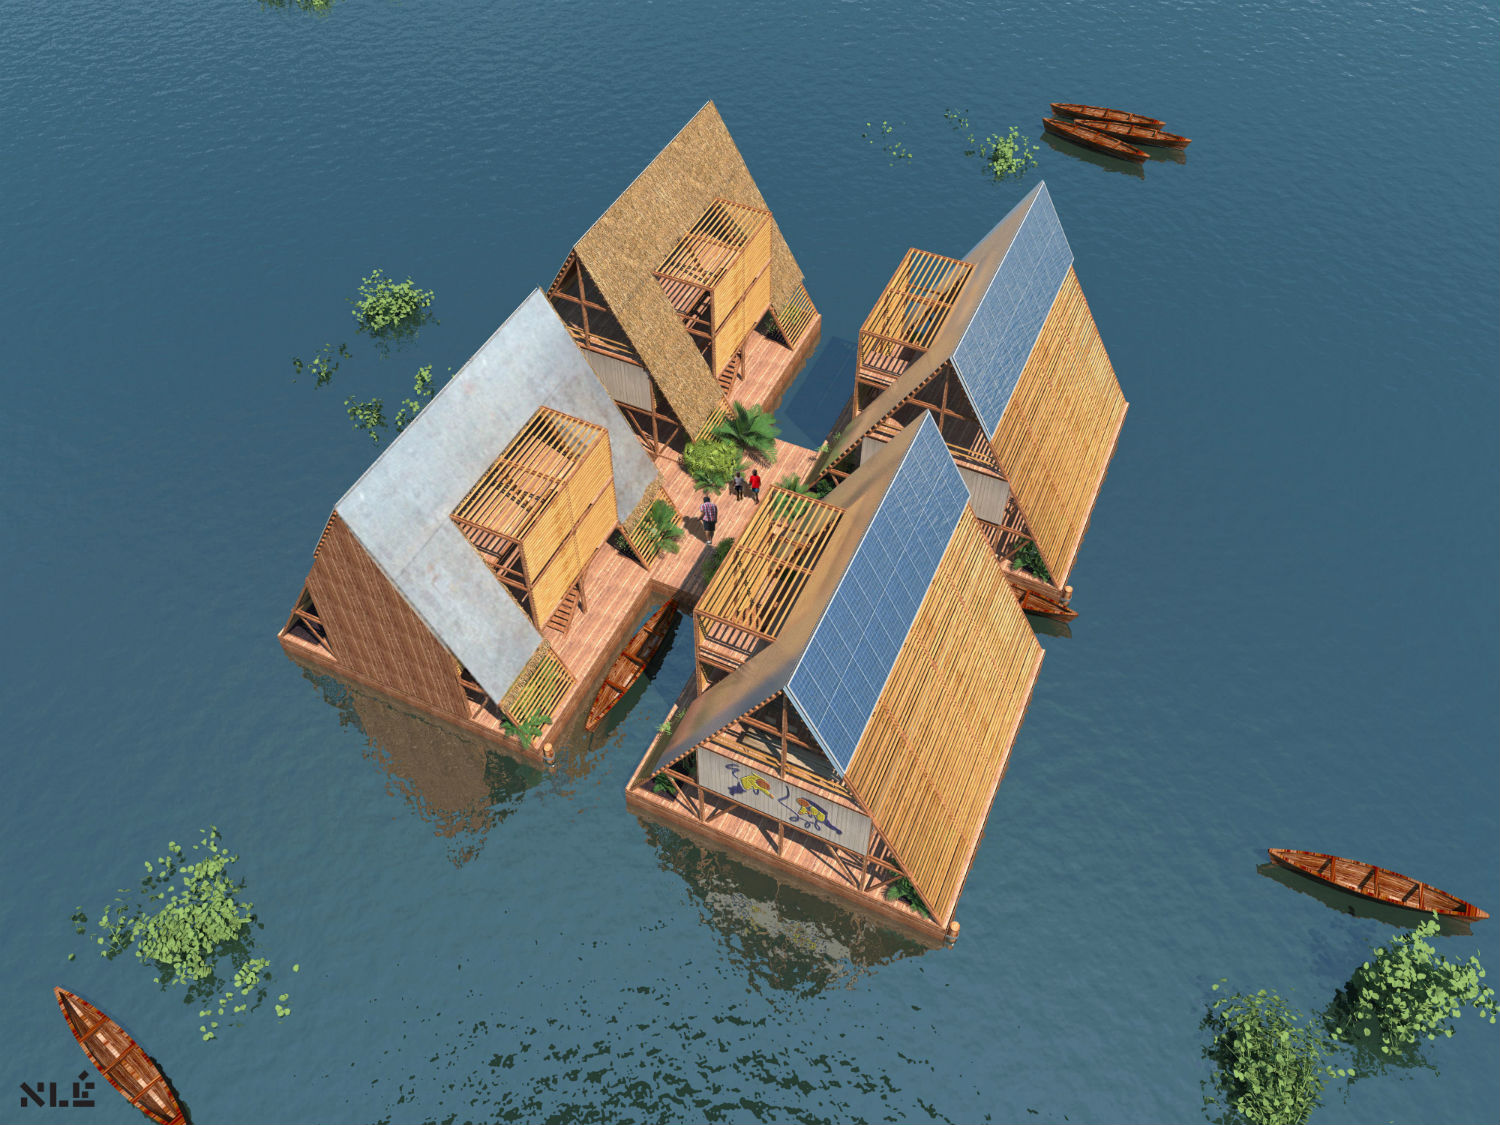 Designs for floating homes in Lagos, Nigeria. The structures are designed from local wood and have solar panels to make them energy self-sufficient. The dwellings are designed to move with the tide, working in harmony with nature rather than against it
